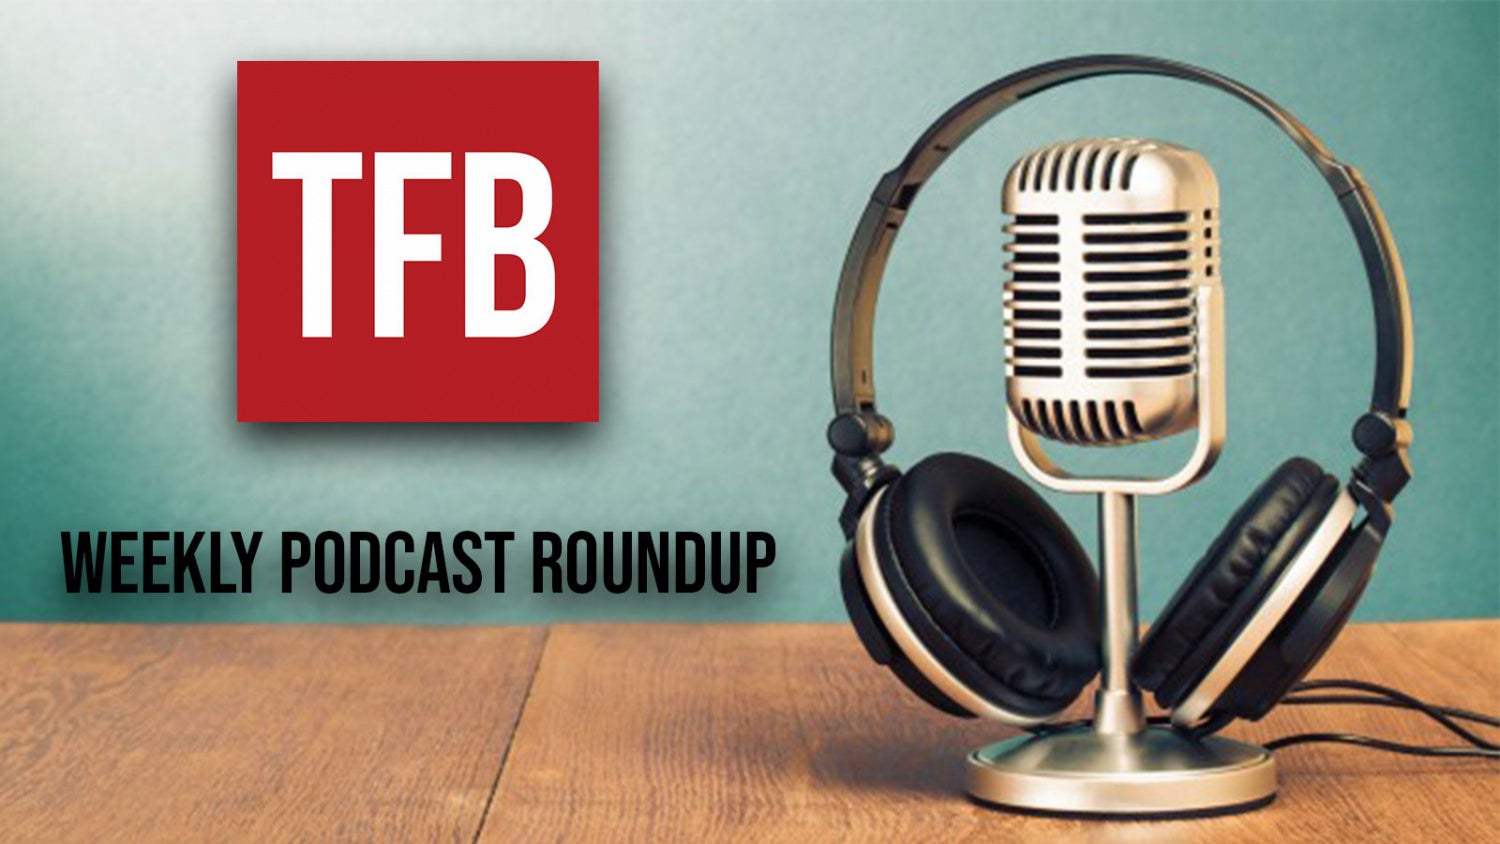 TFB Podcast Roundup 41: Talking with TFB's Vlad, and CCW Gun Choices